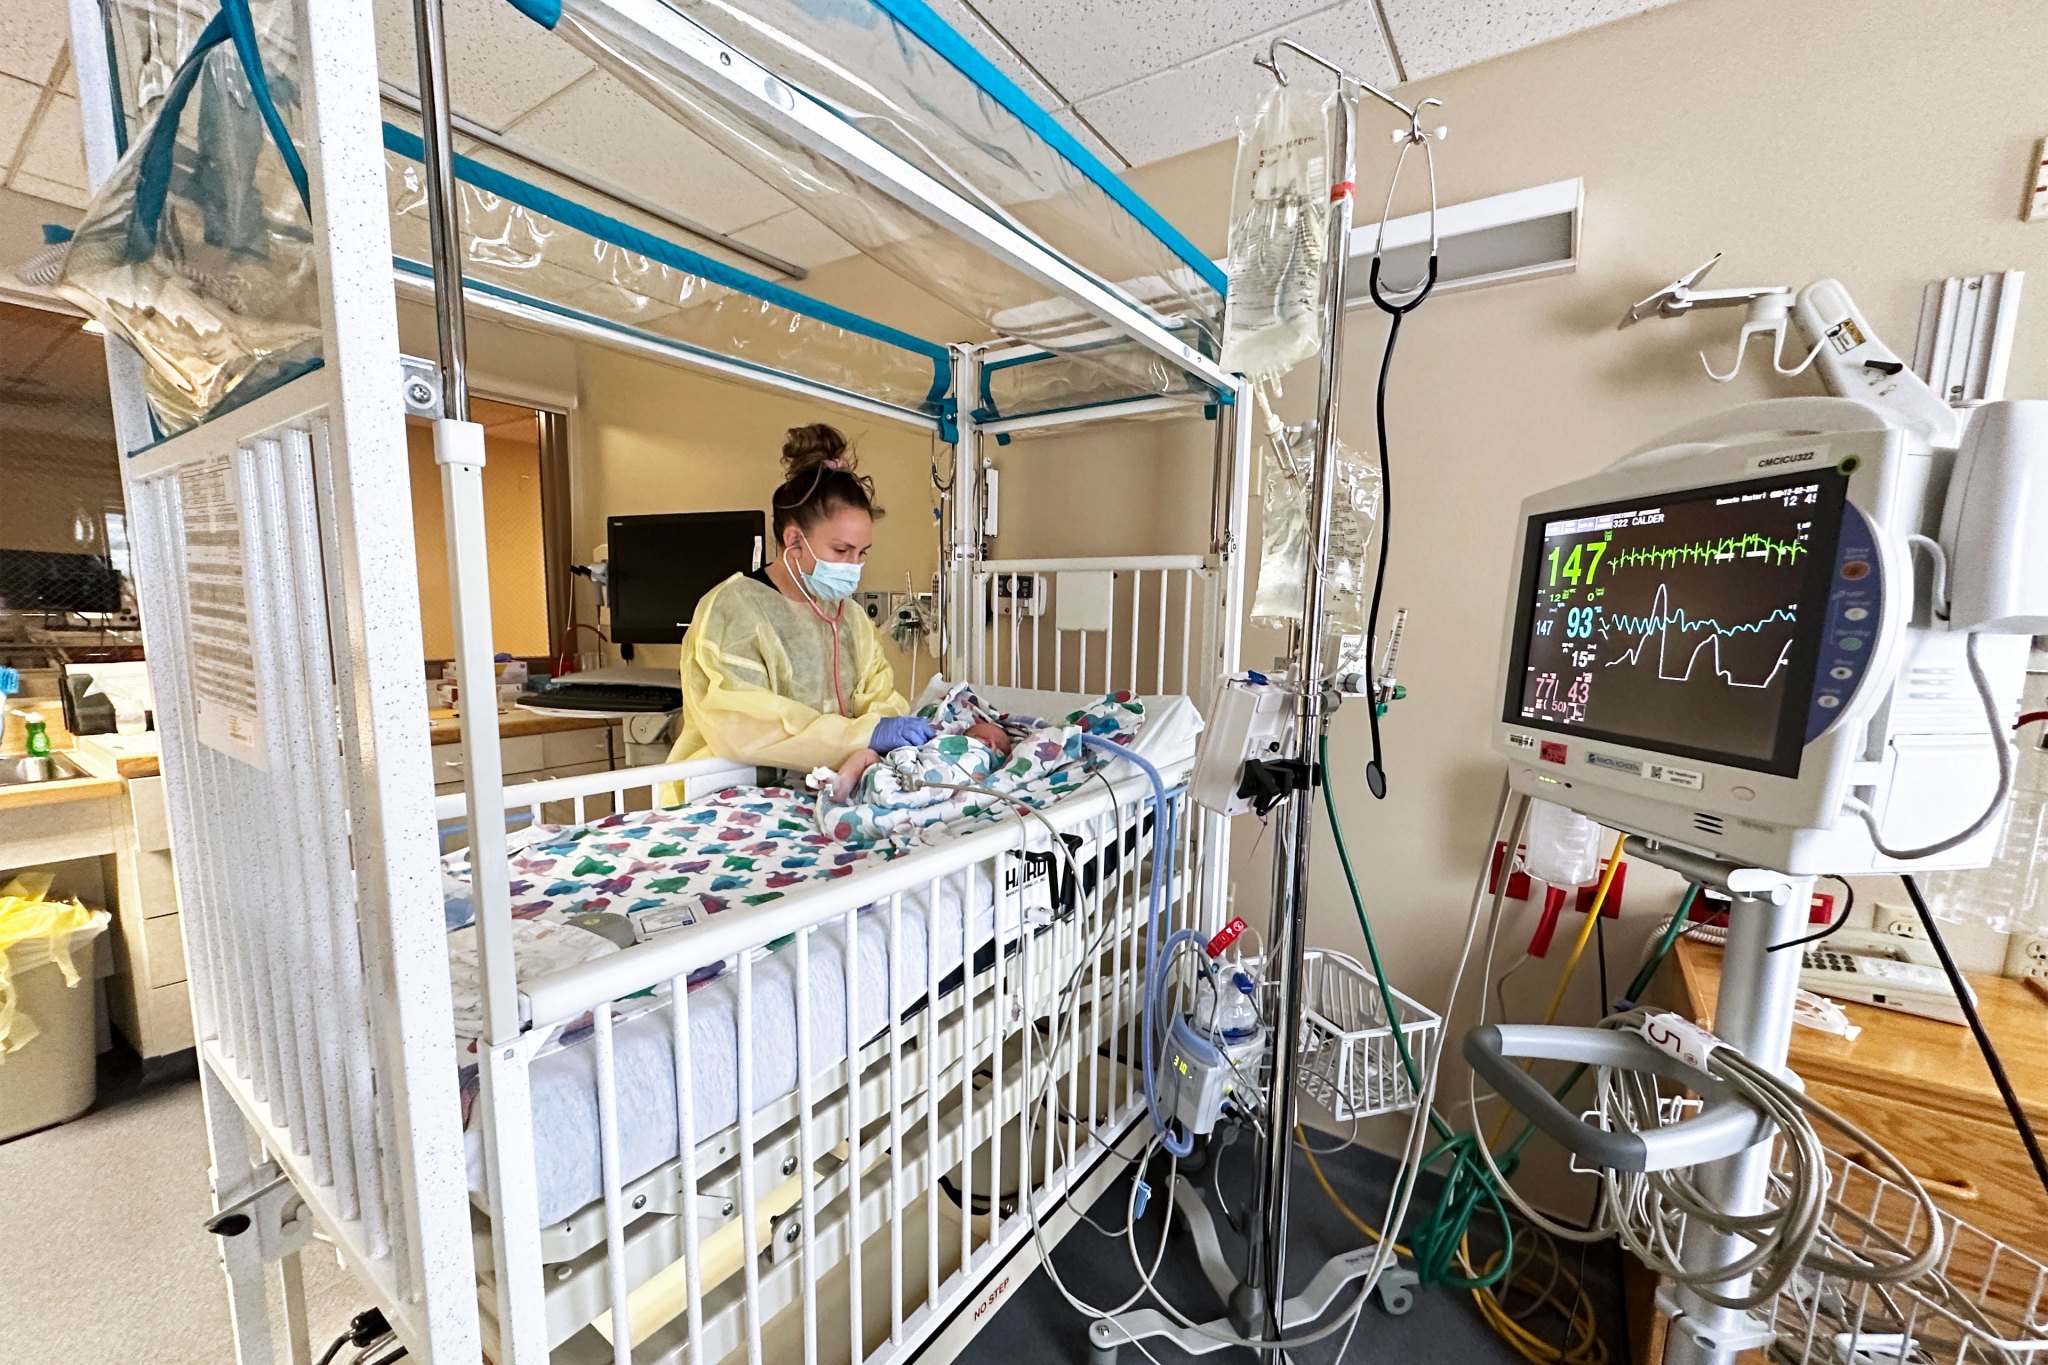 Hospital Financial Decisions Play a Role in the Critical Shortage of Pediatric Beds for RSV Patients